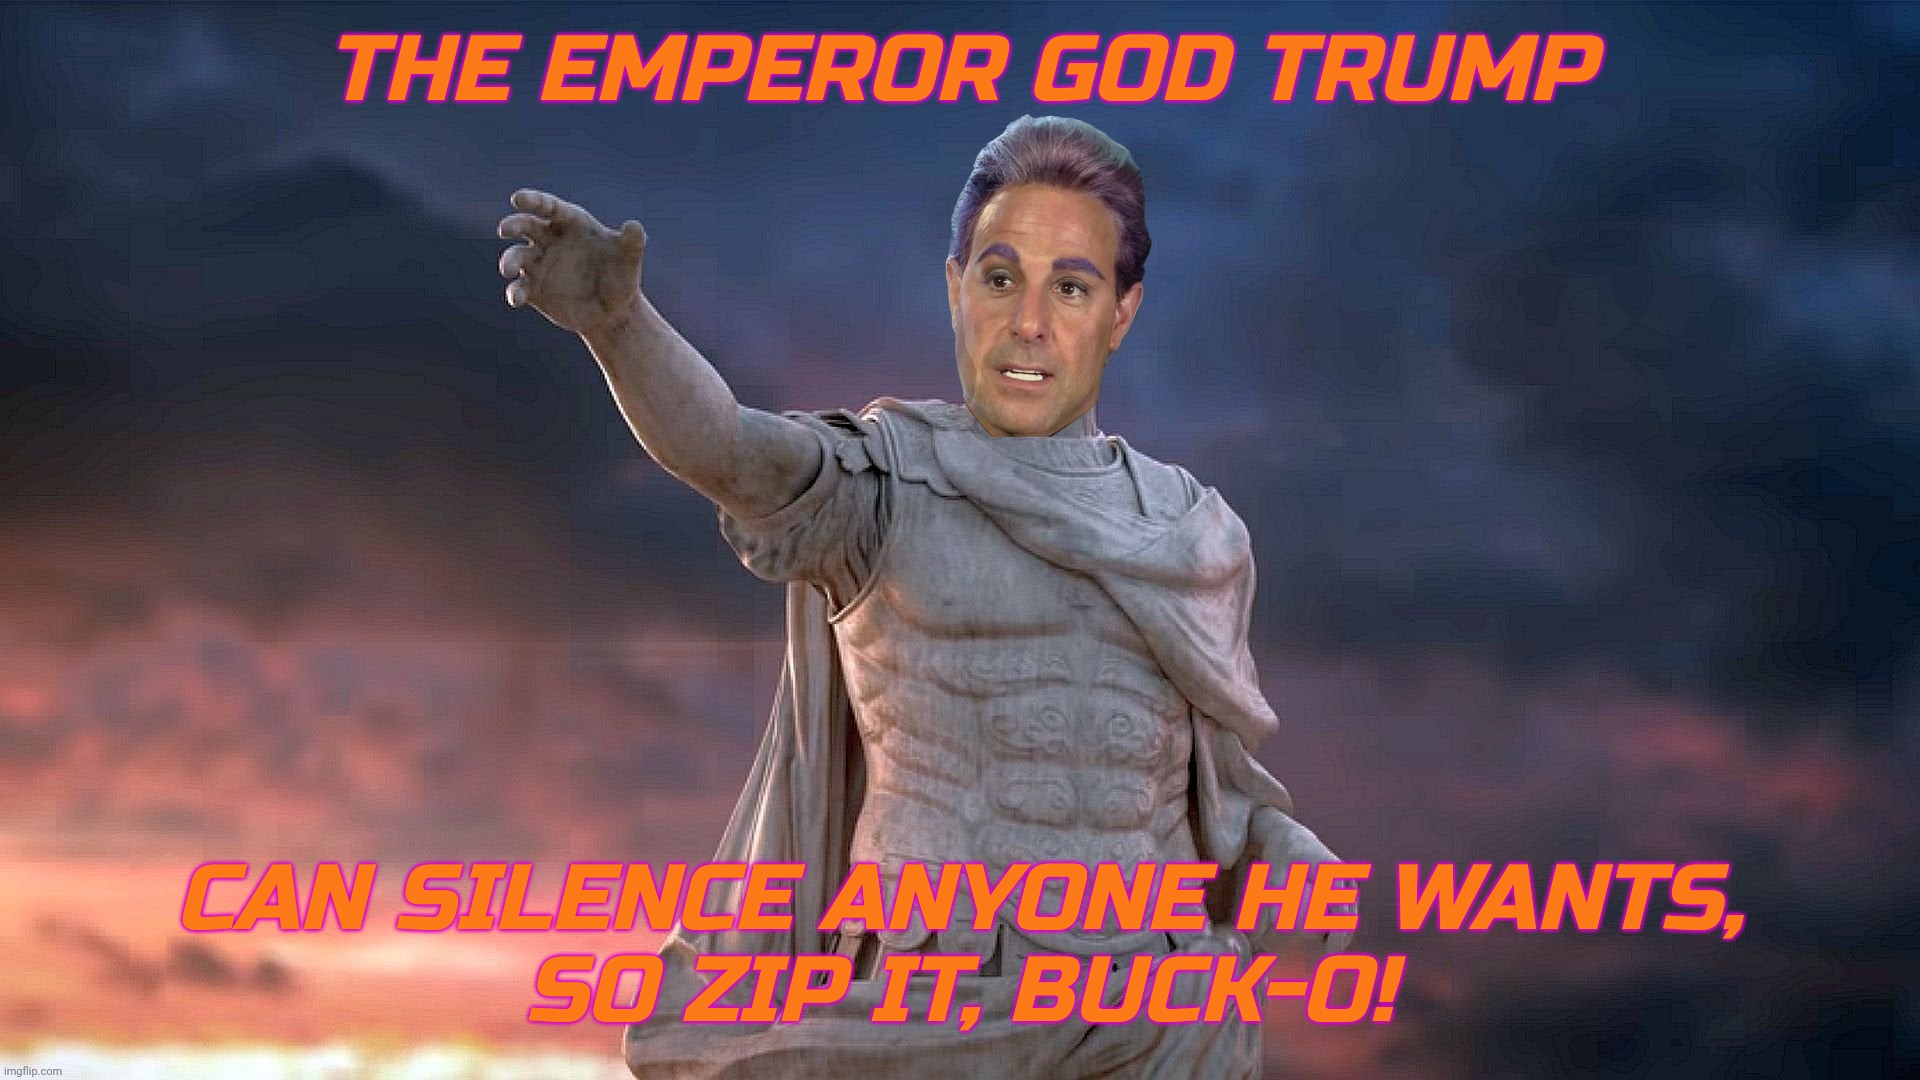 THE EMPEROR GOD TRUMP CAN SILENCE ANYONE HE WANTS,
SO ZIP IT, BUCK-O! | image tagged in caesar flickerman | made w/ Imgflip meme maker